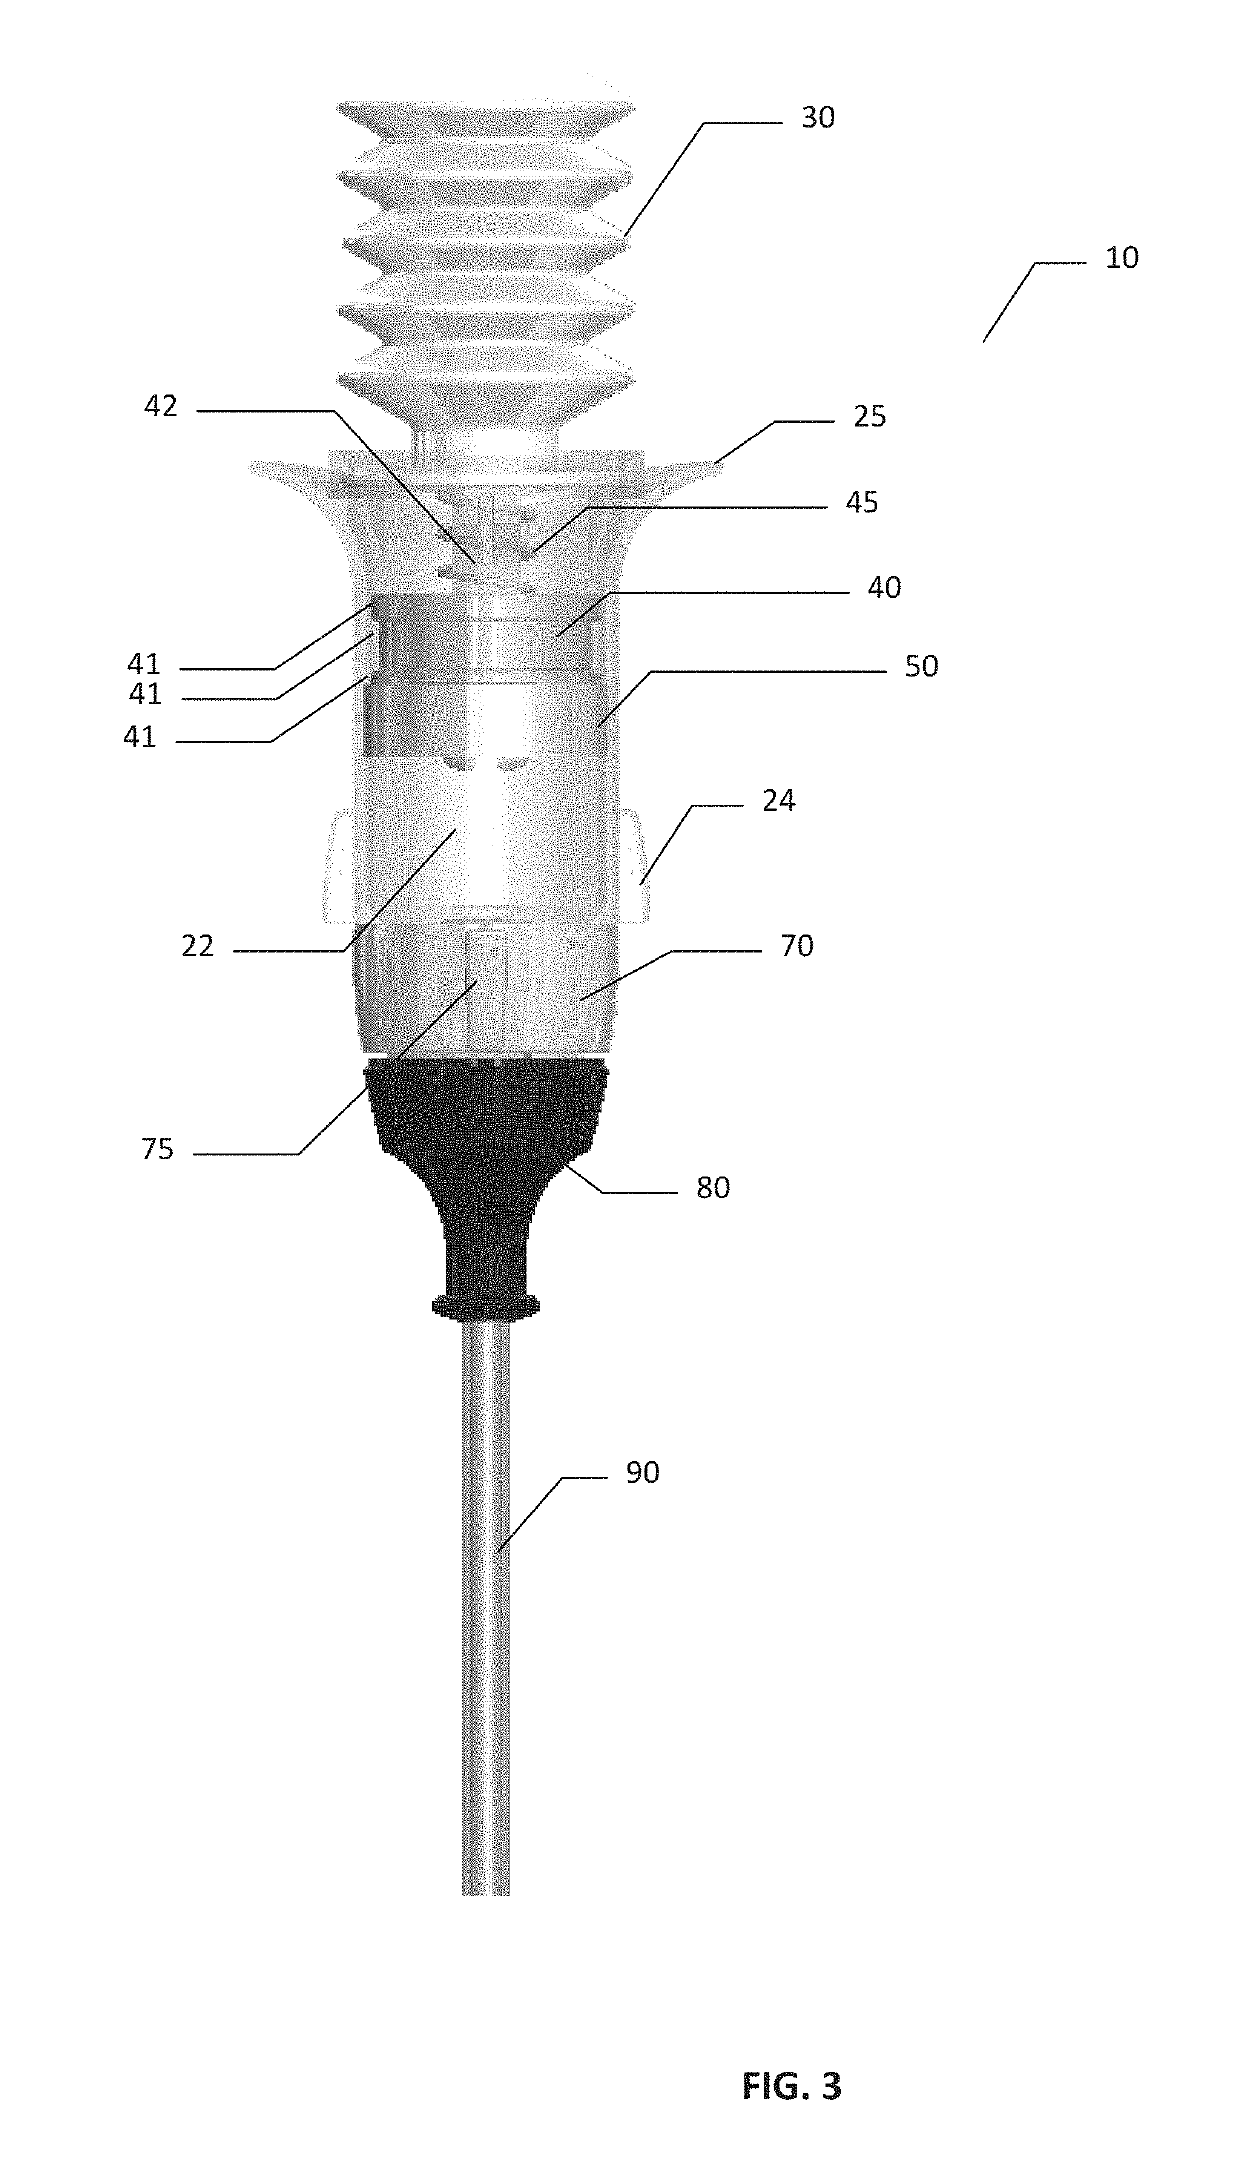 Hemostatic powder delivery devices and methods